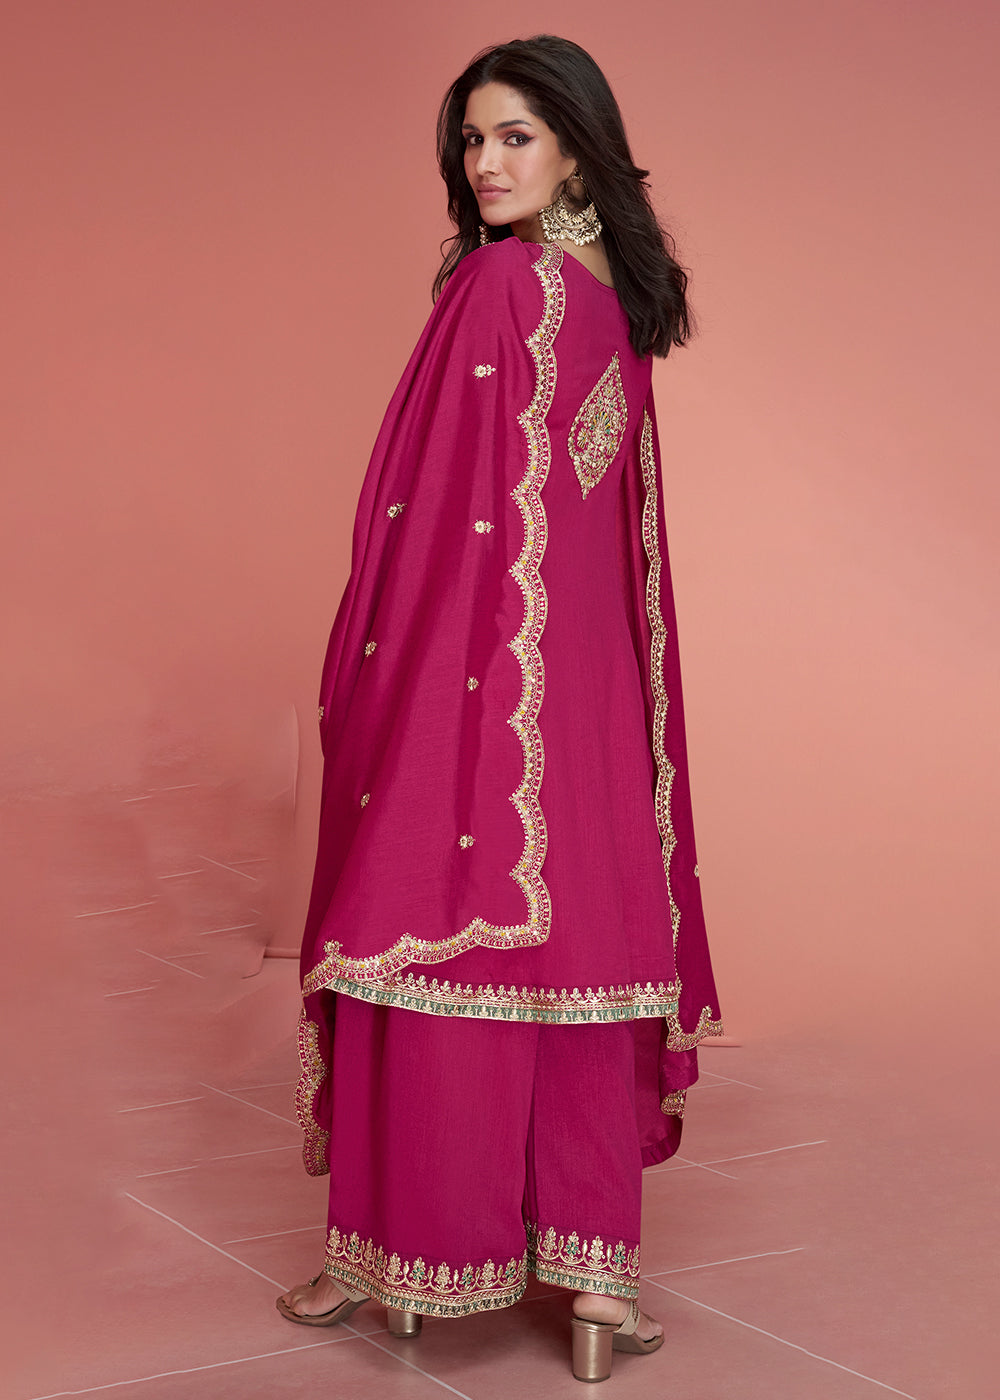 Buy Now Resham Thread Embroidered Pink Festive Palazzo Suit Online in USA, UK, Canada, Germany, Australia & Worldwide at Empress Clothing.